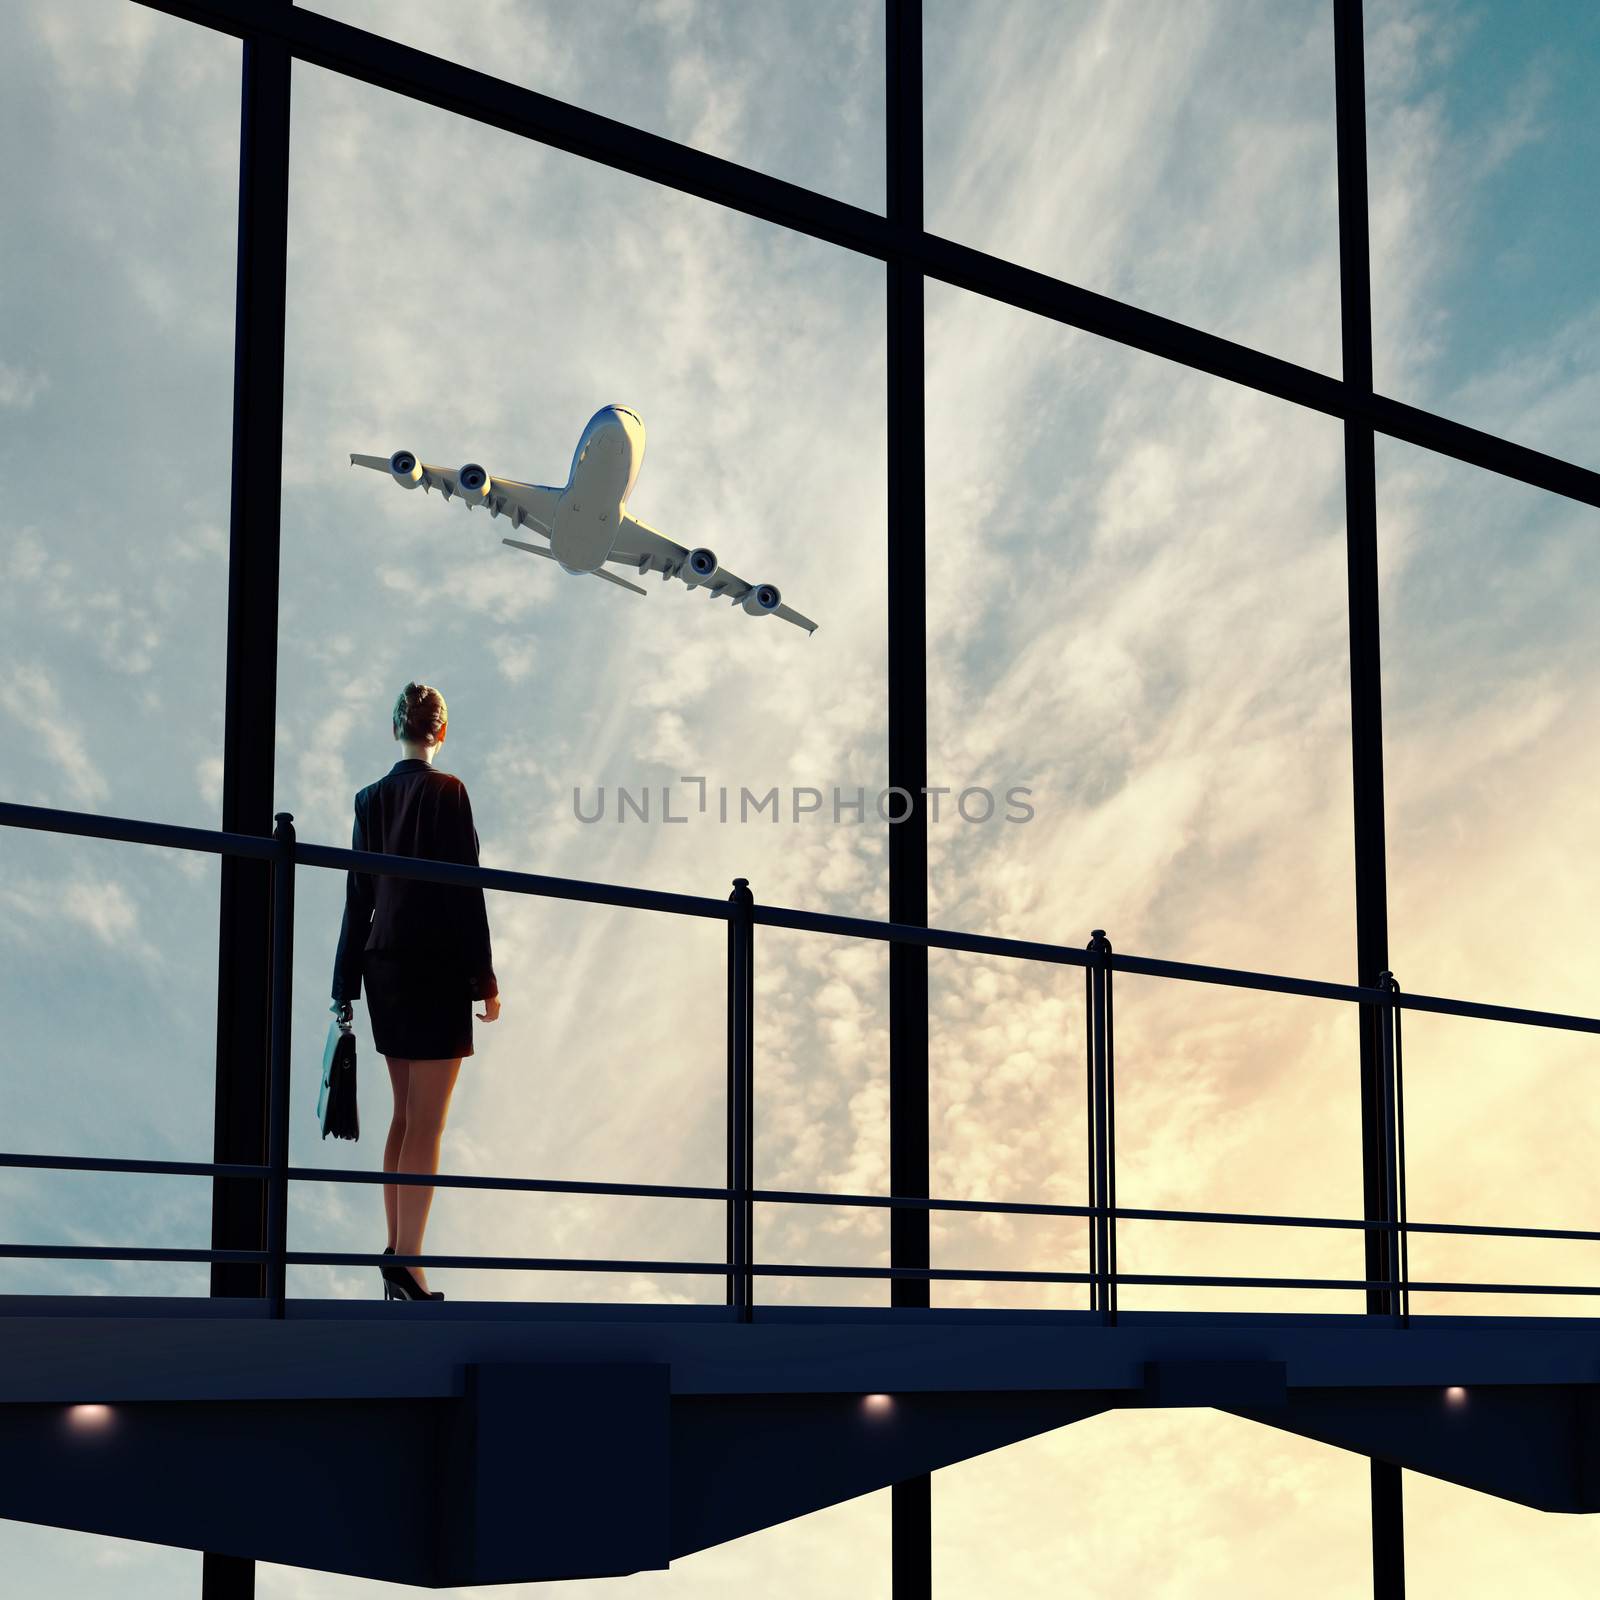 Image of businesswoman at airport looking at airplane taking off